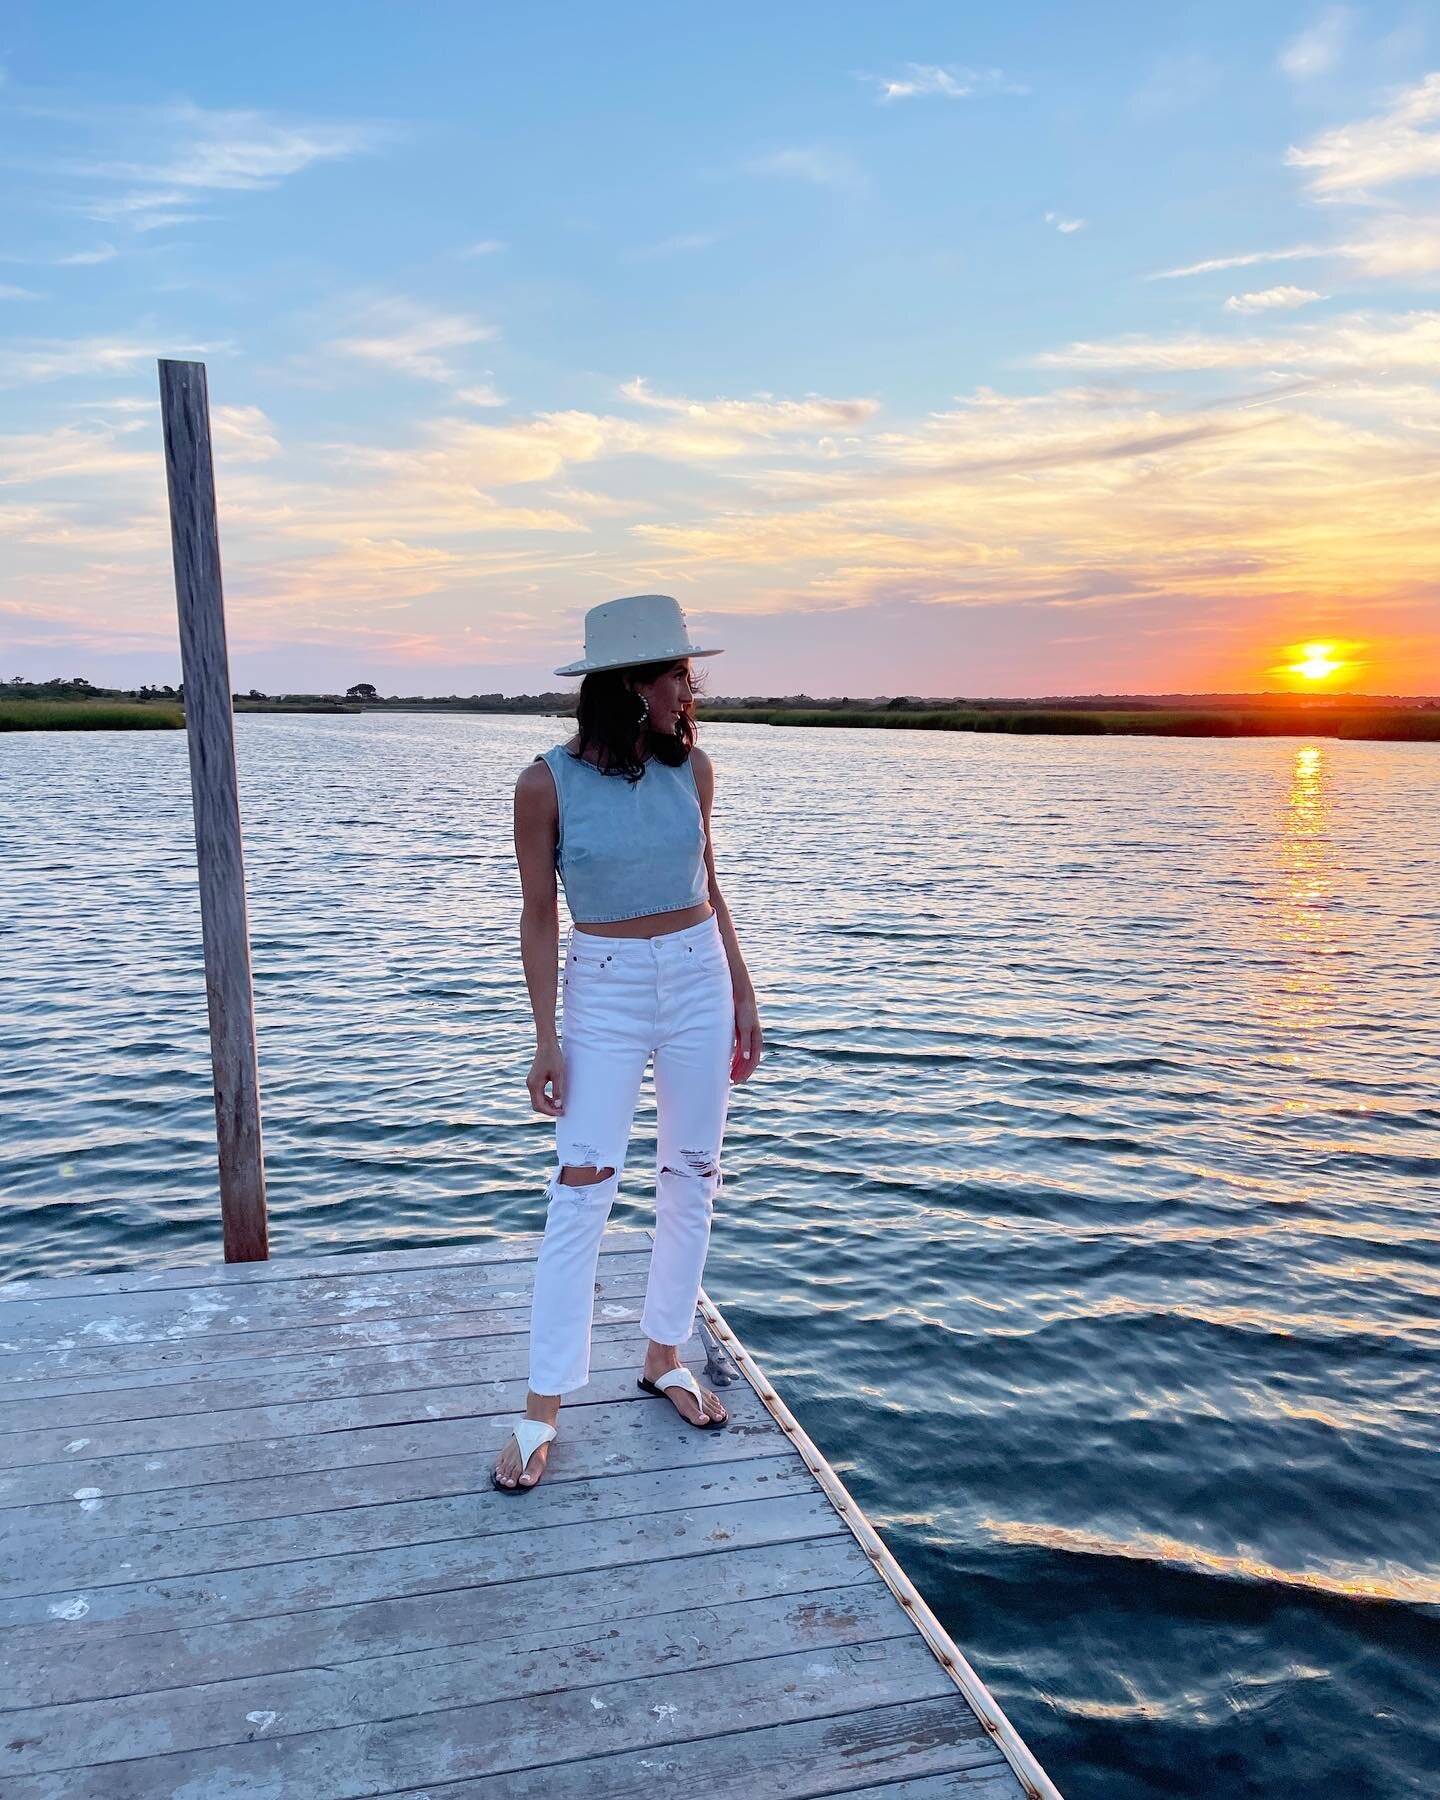 That feeling when you wake up inspired, knowing something great happened in your dream, but you can&rsquo;t remember what it was&hellip; ☀️ 

#dreamyourlife #dreamyourreality #politicalpersonalitieswithskye #sunsetphotography #dockerswaterside #jeano